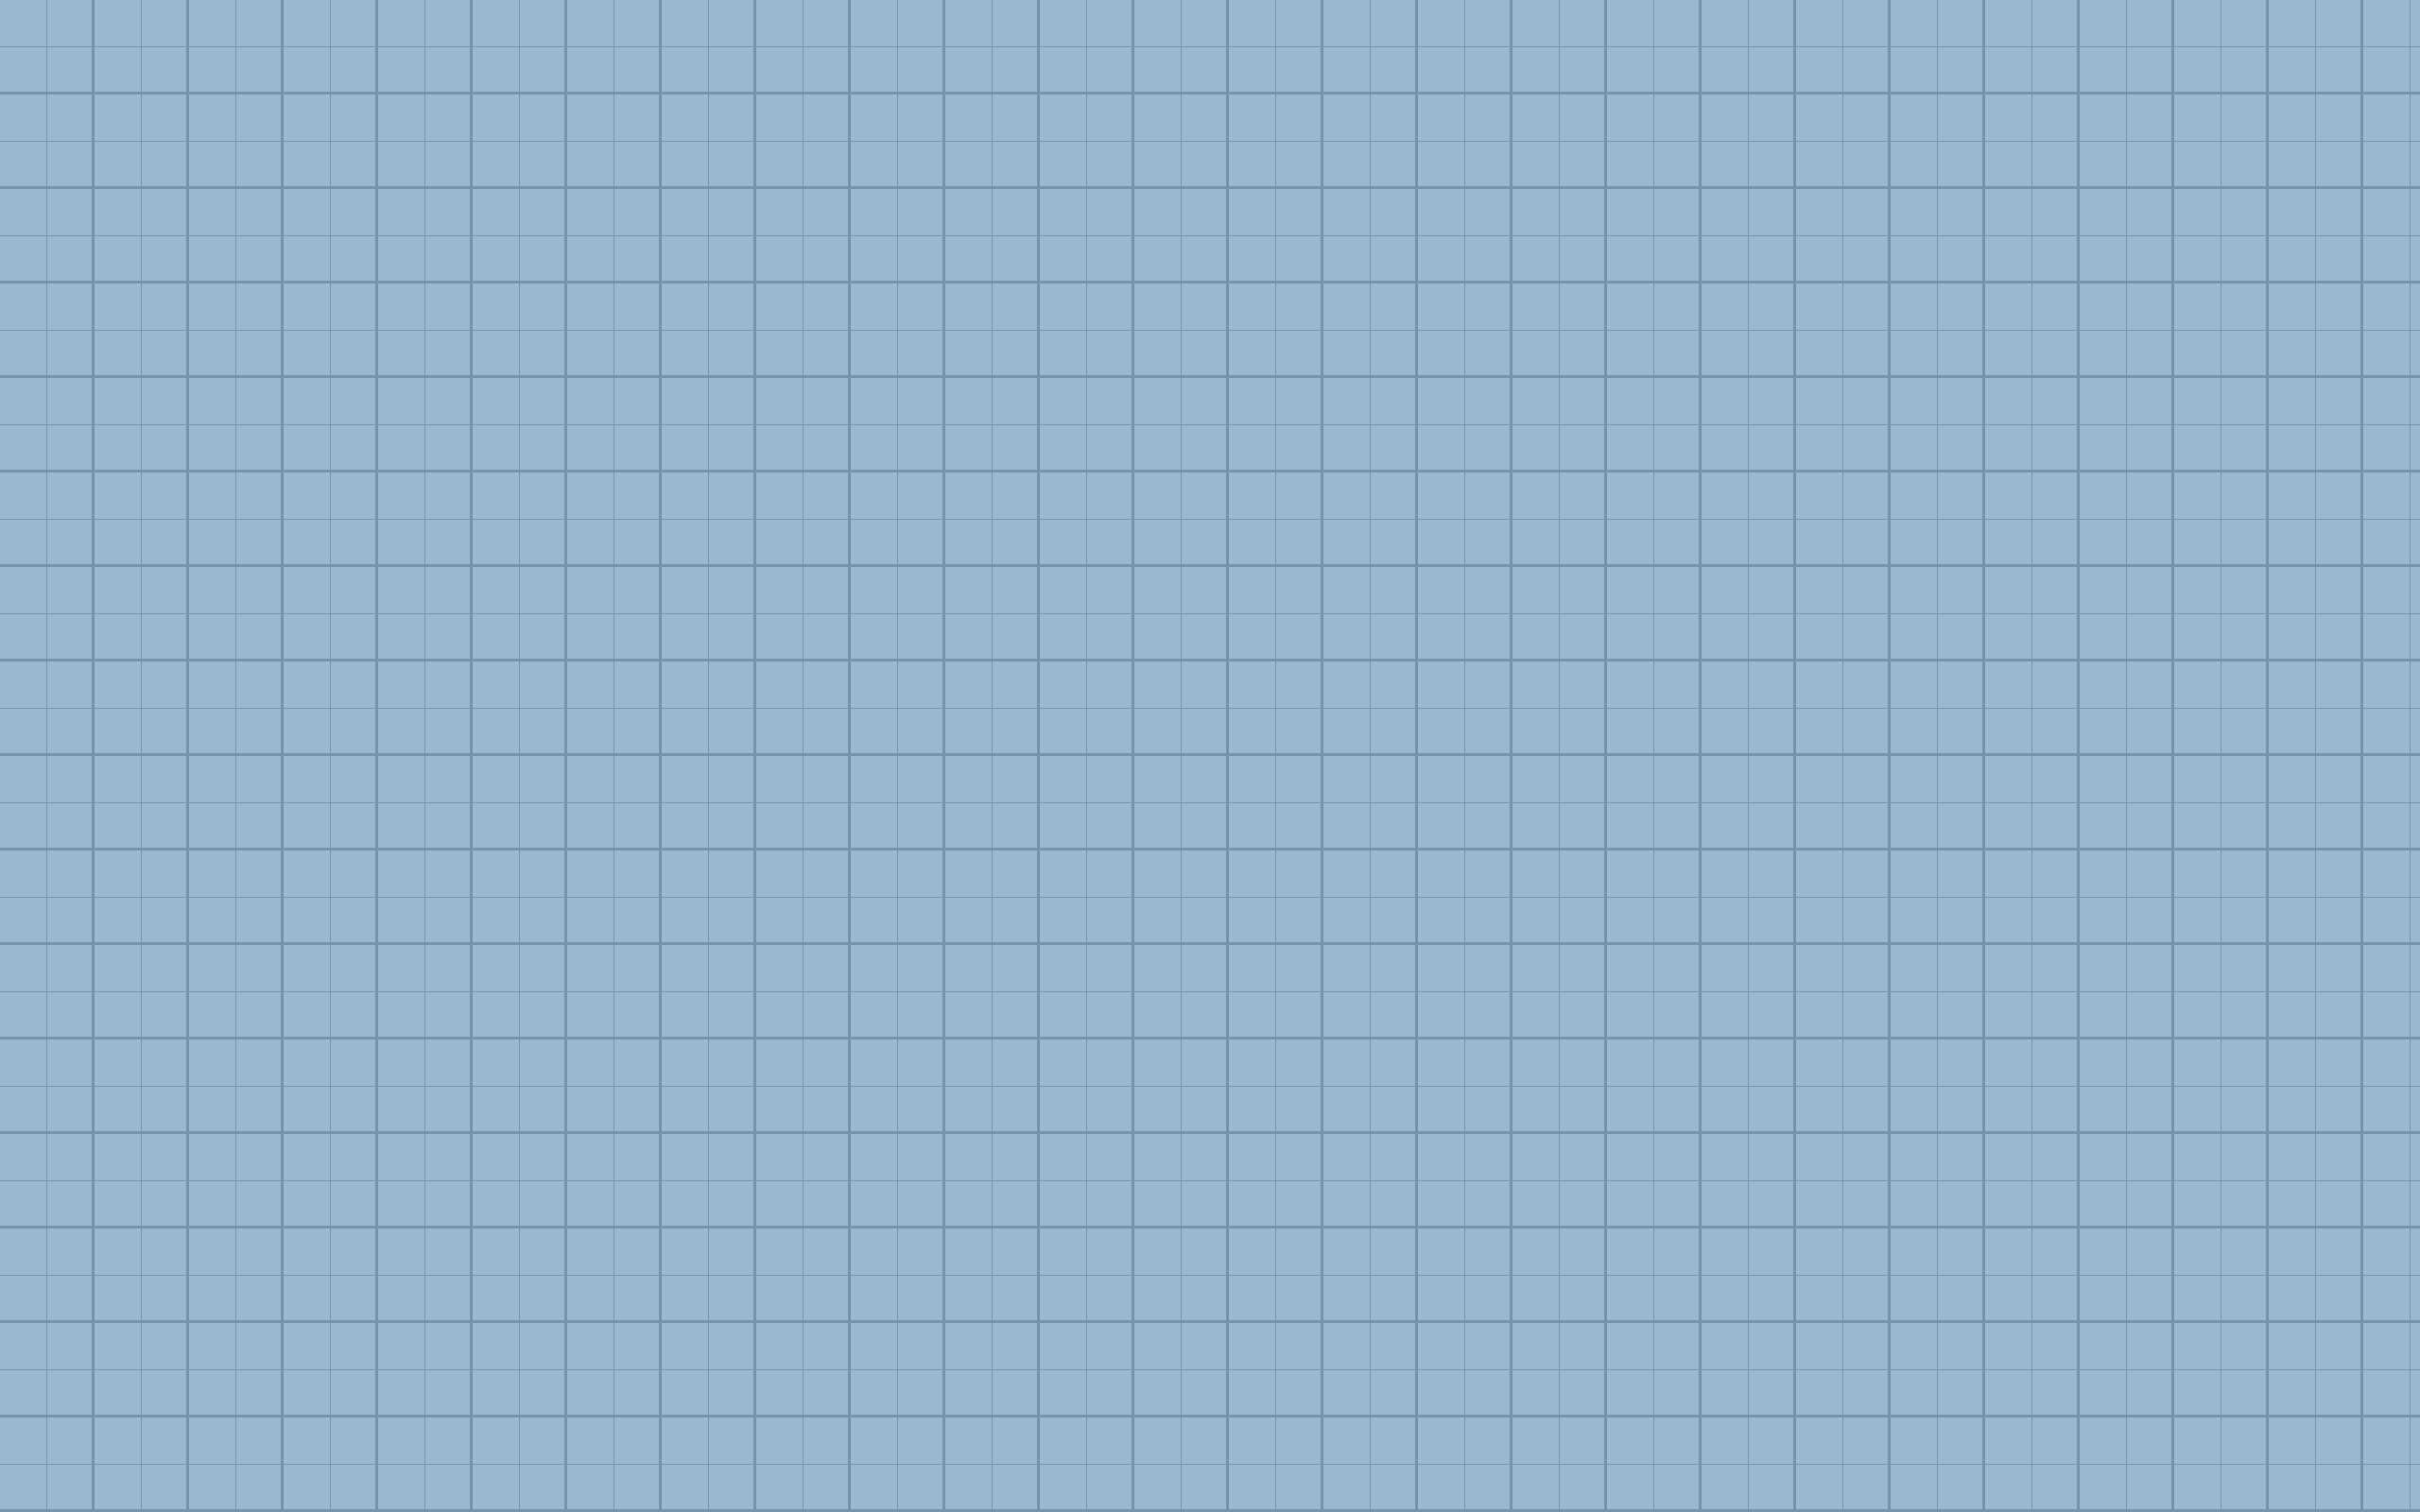 A blue background with white lines - Grid